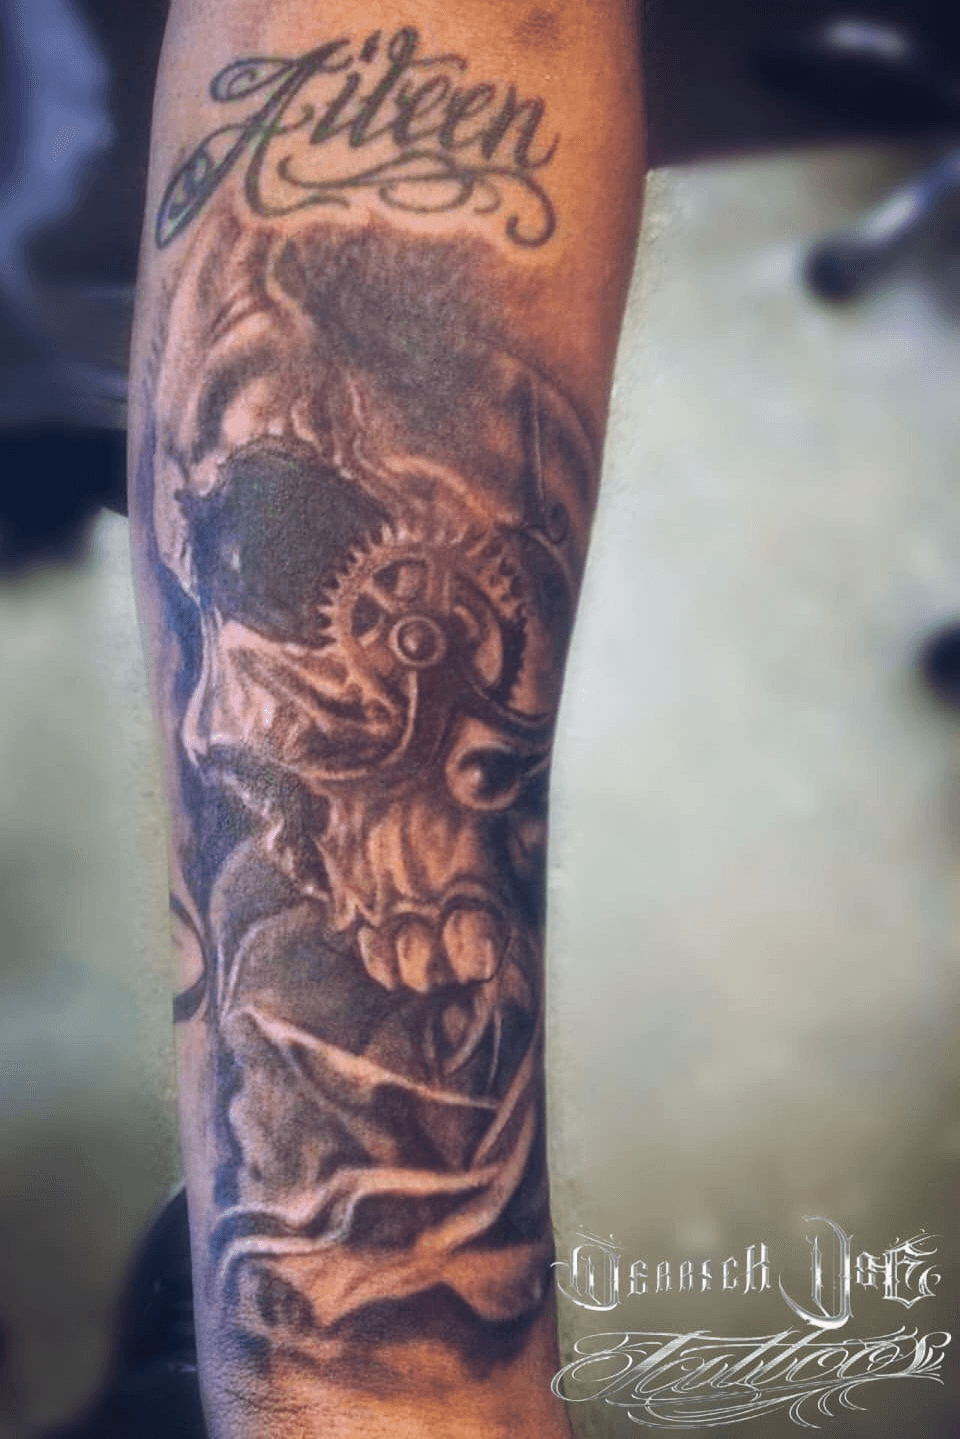 Tattoo Artist Shares 700 Design Leaving Some Viewers Horrified